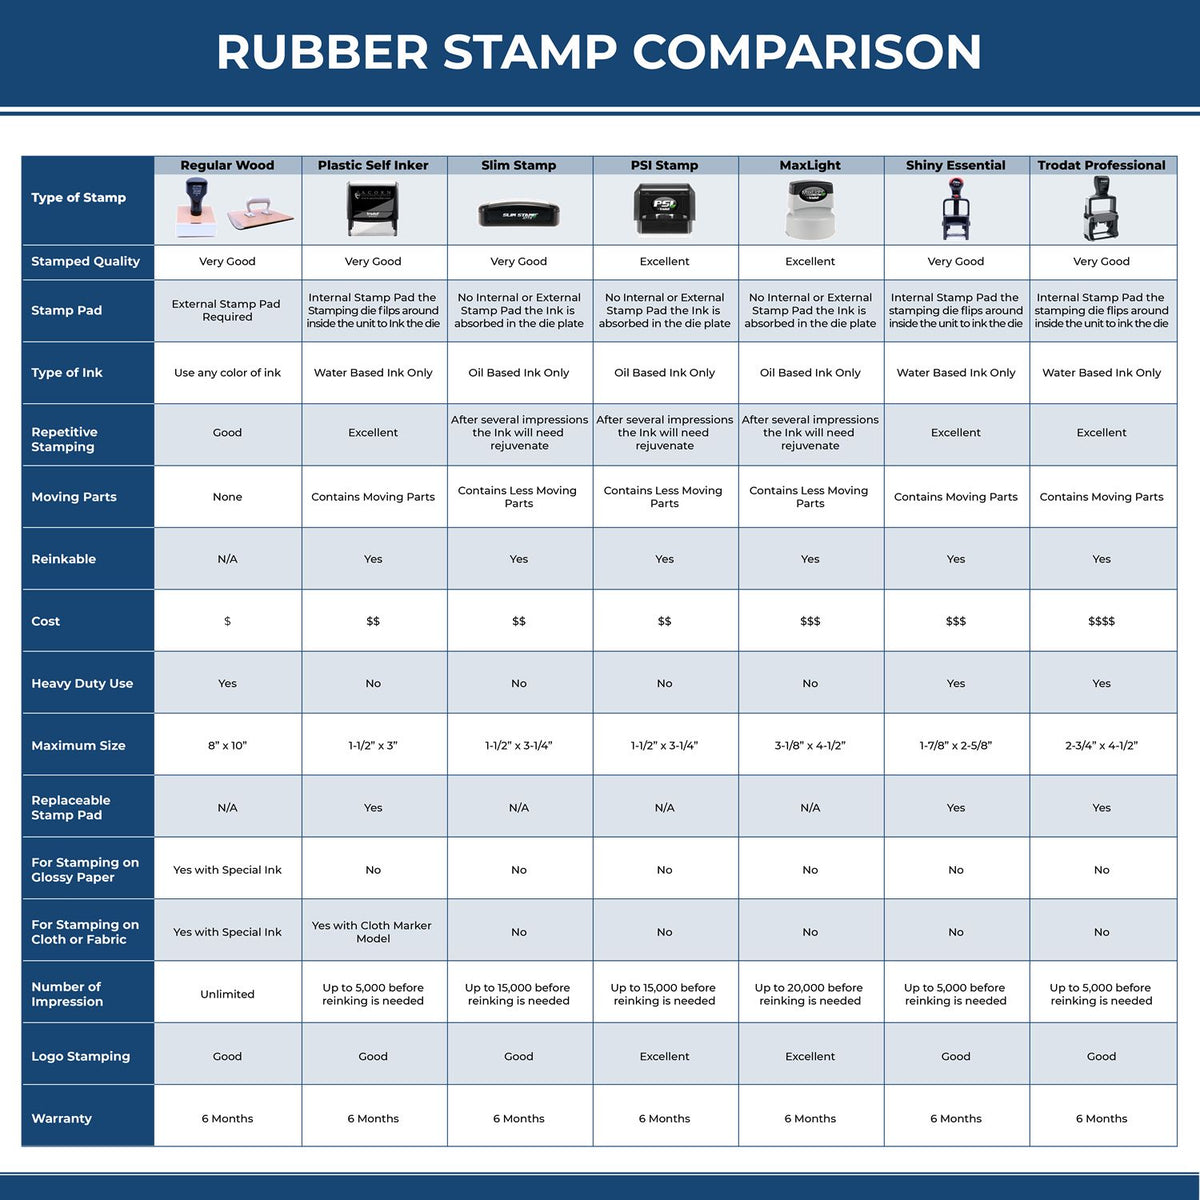 Large Self Inking Credit Report Stamp 4570S Rubber Stamp Comparison